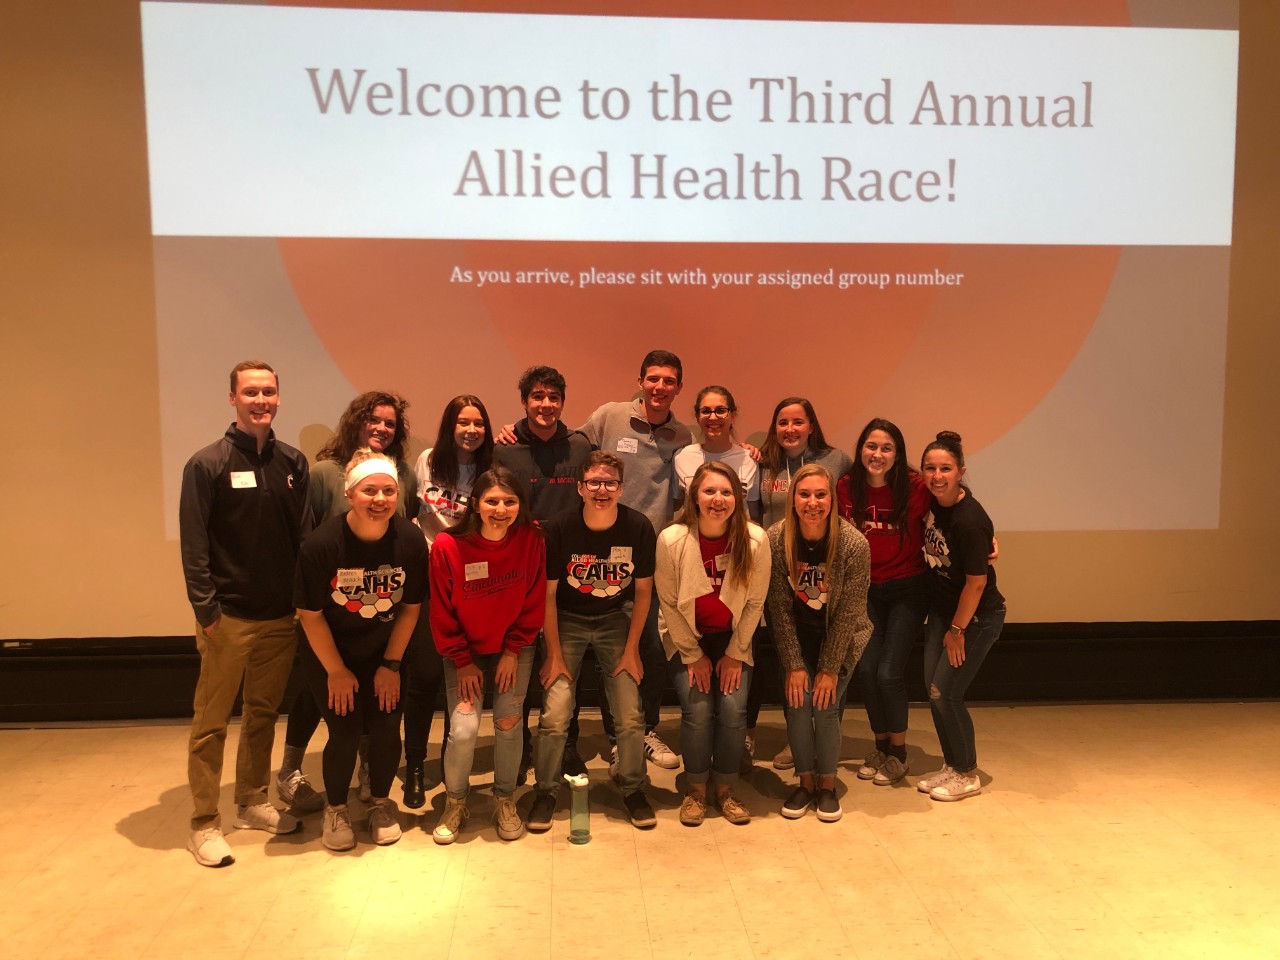 Allied Health Race students pose for a photo